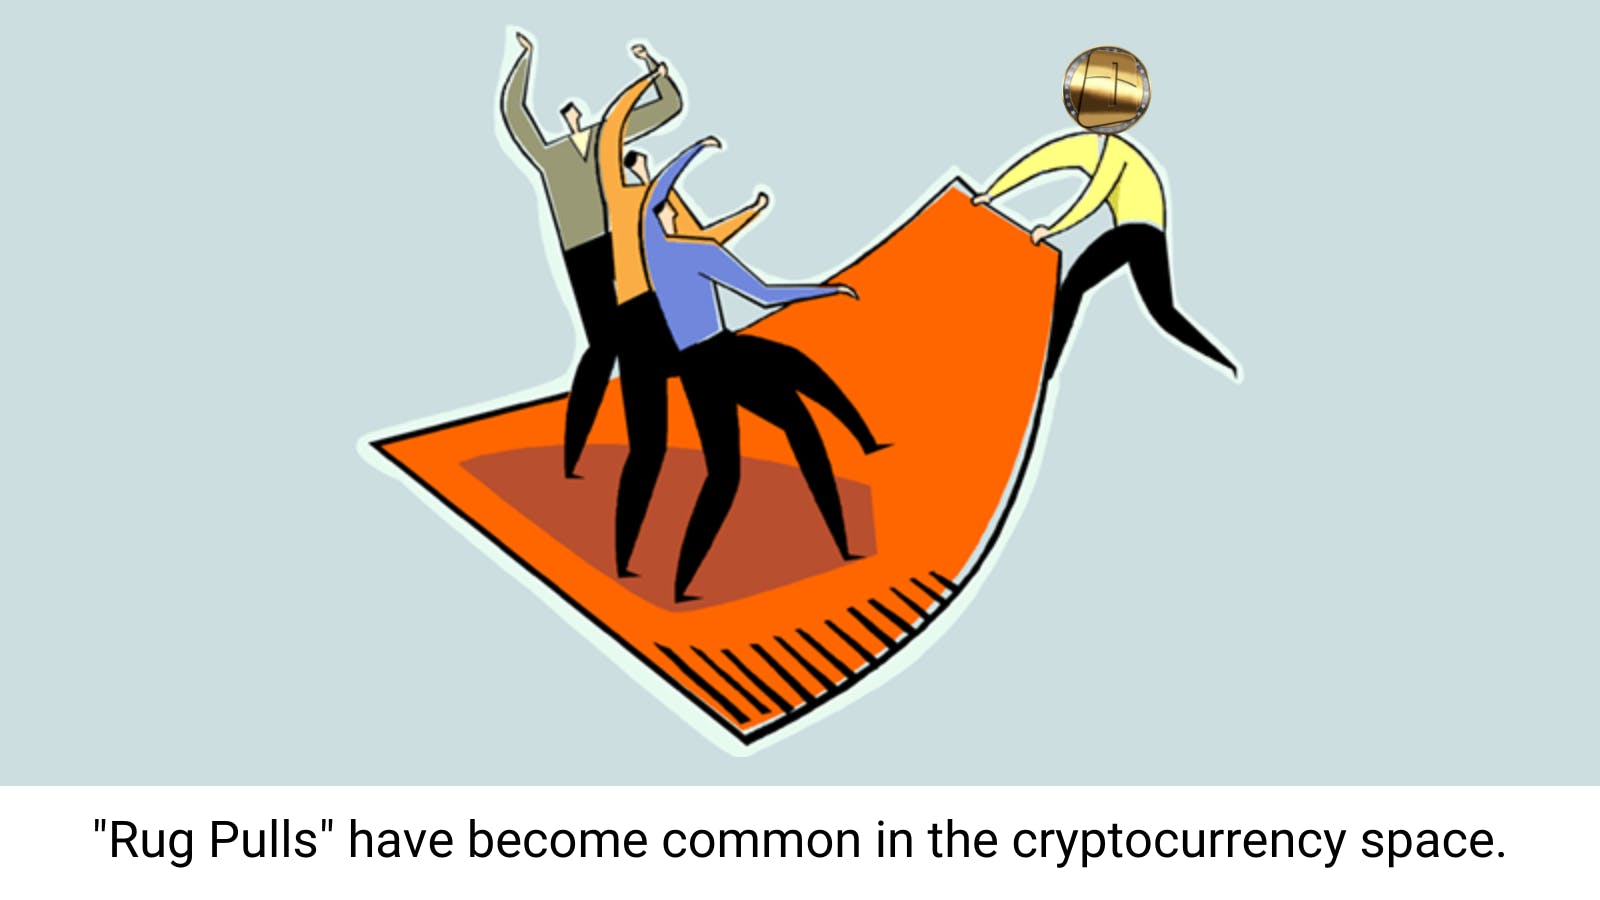 rug pulls have become common in the cryptocurrency space